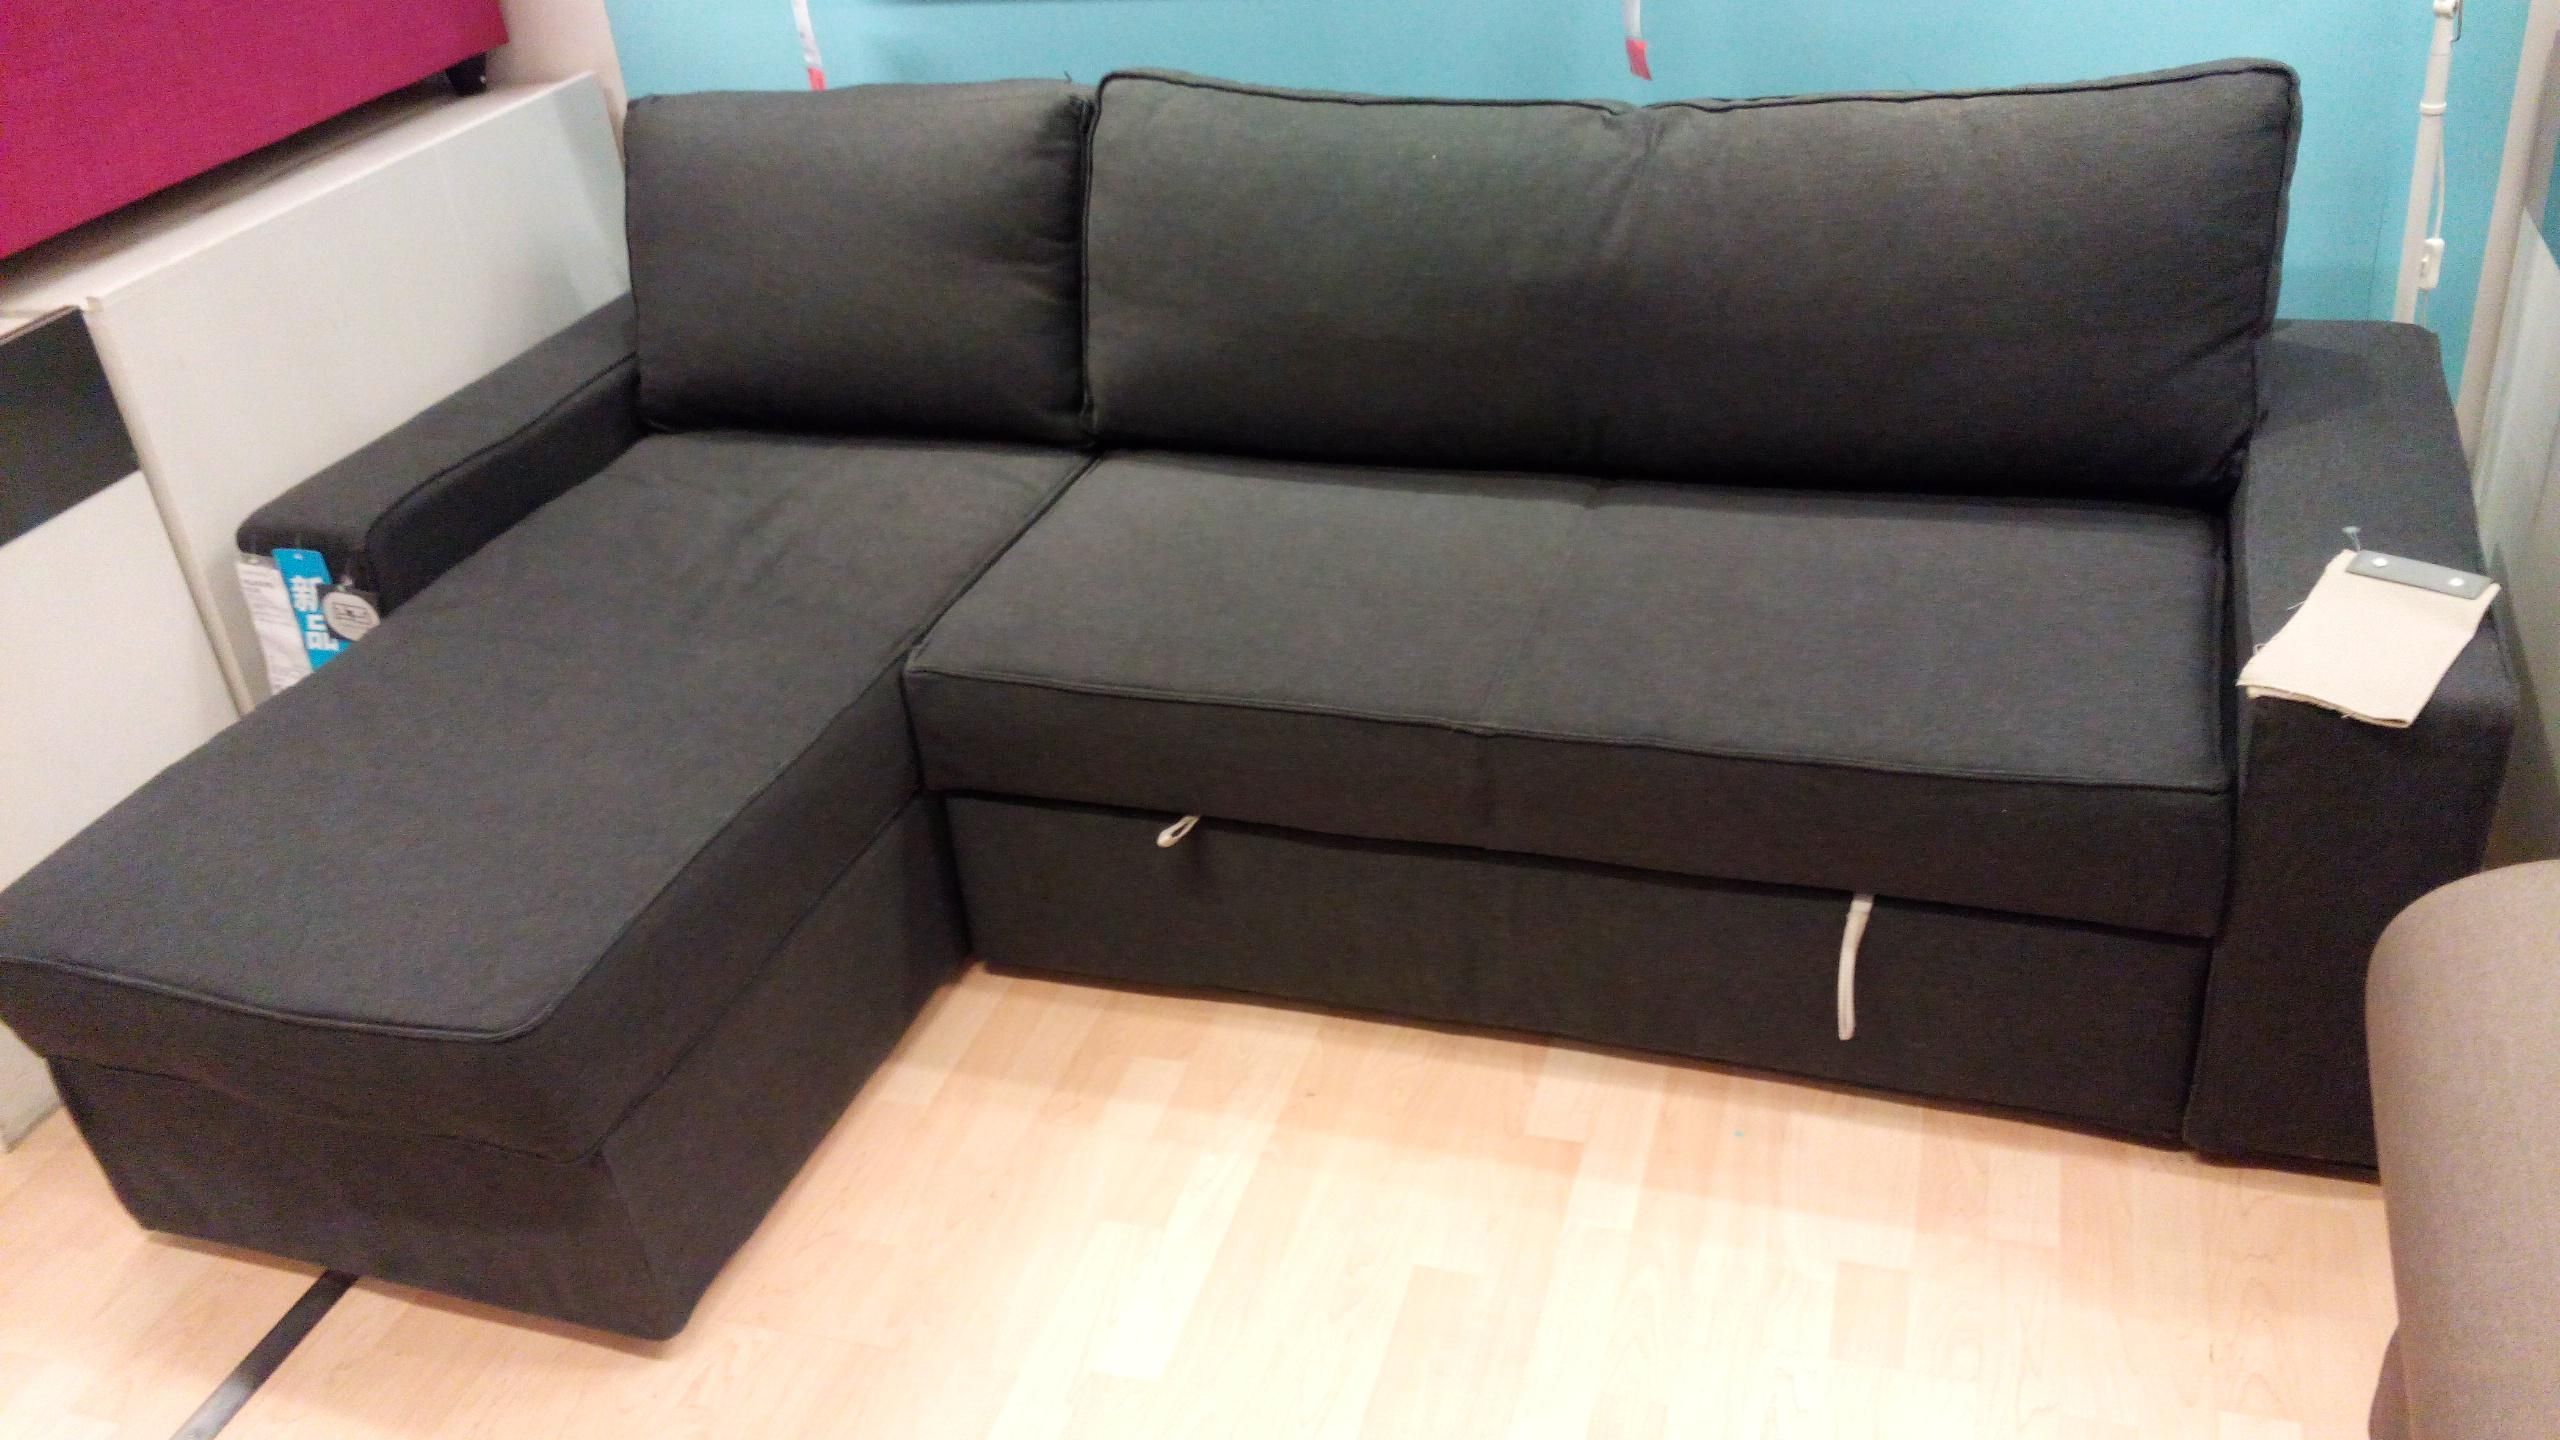 Ikea Vilasund And Backabro Review – Return Of The Sofa Bed Clones! Regarding Manstad Sofa Bed With Storage From Ikea (View 5 of 20)